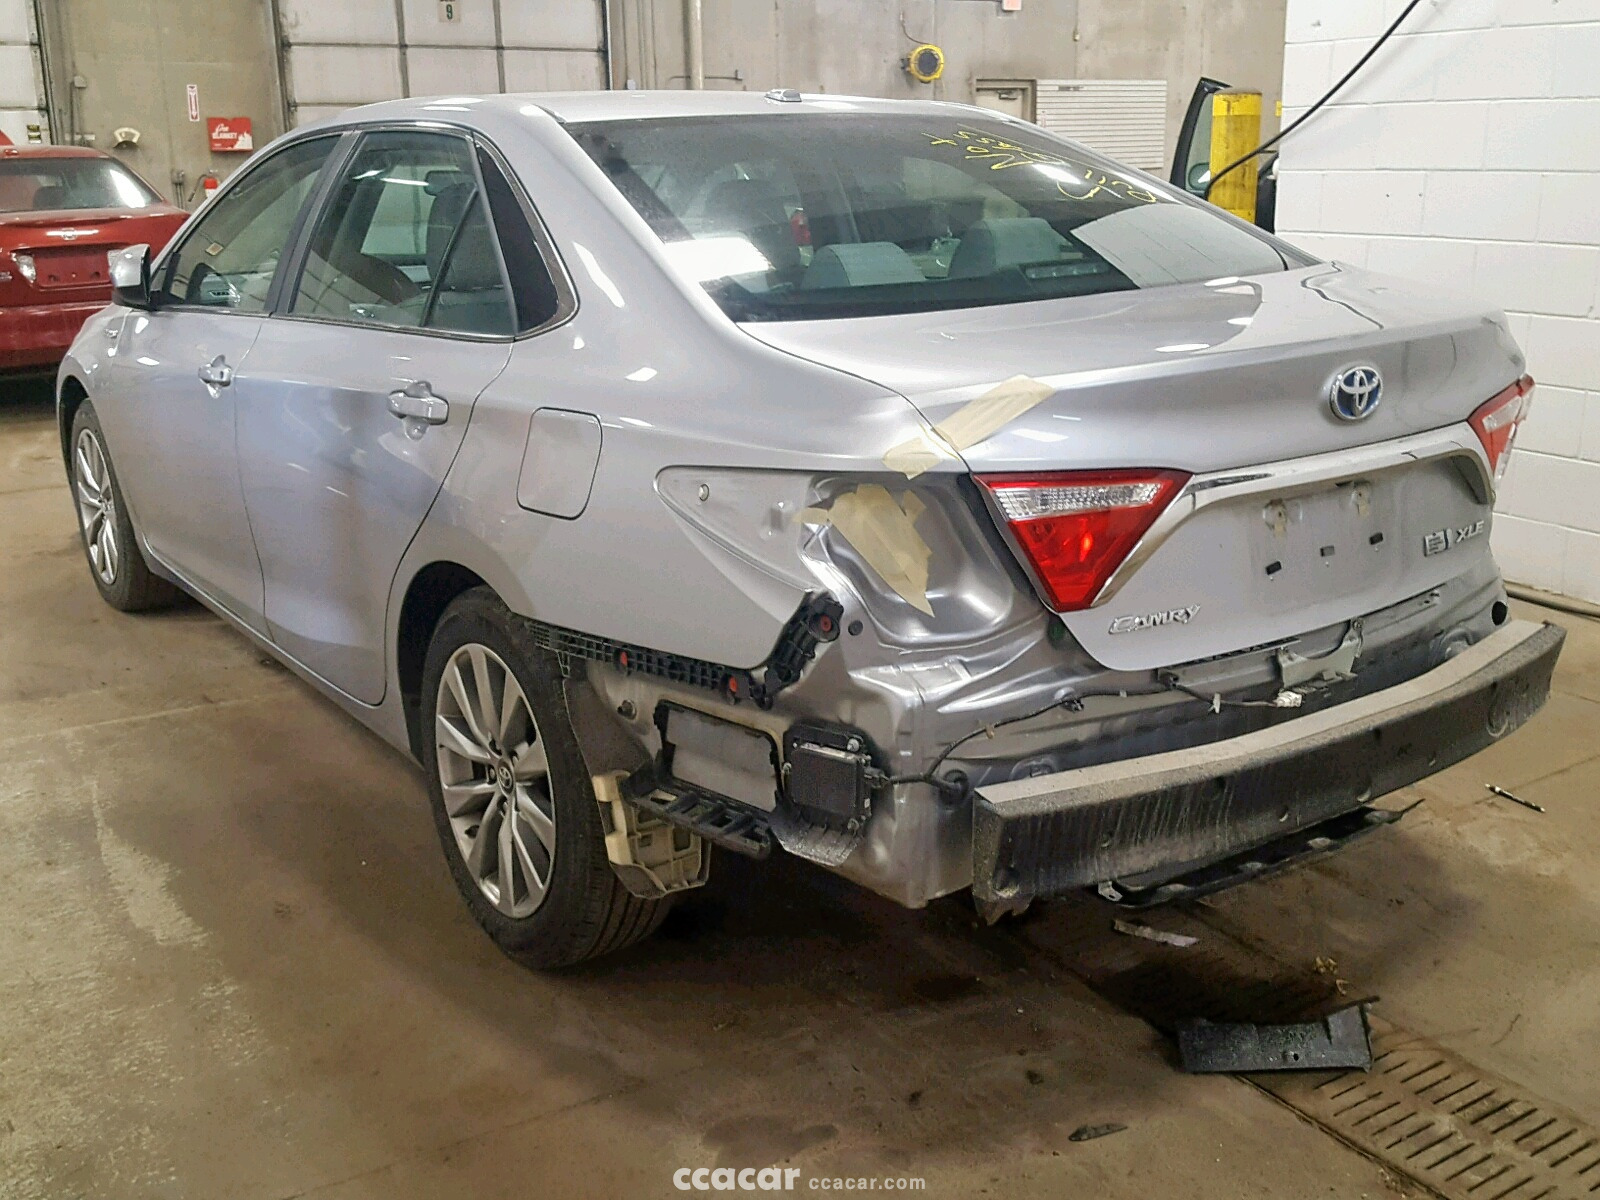 2016 Toyota Camry Hybrid SE | Salvage & Damaged Cars for Sale